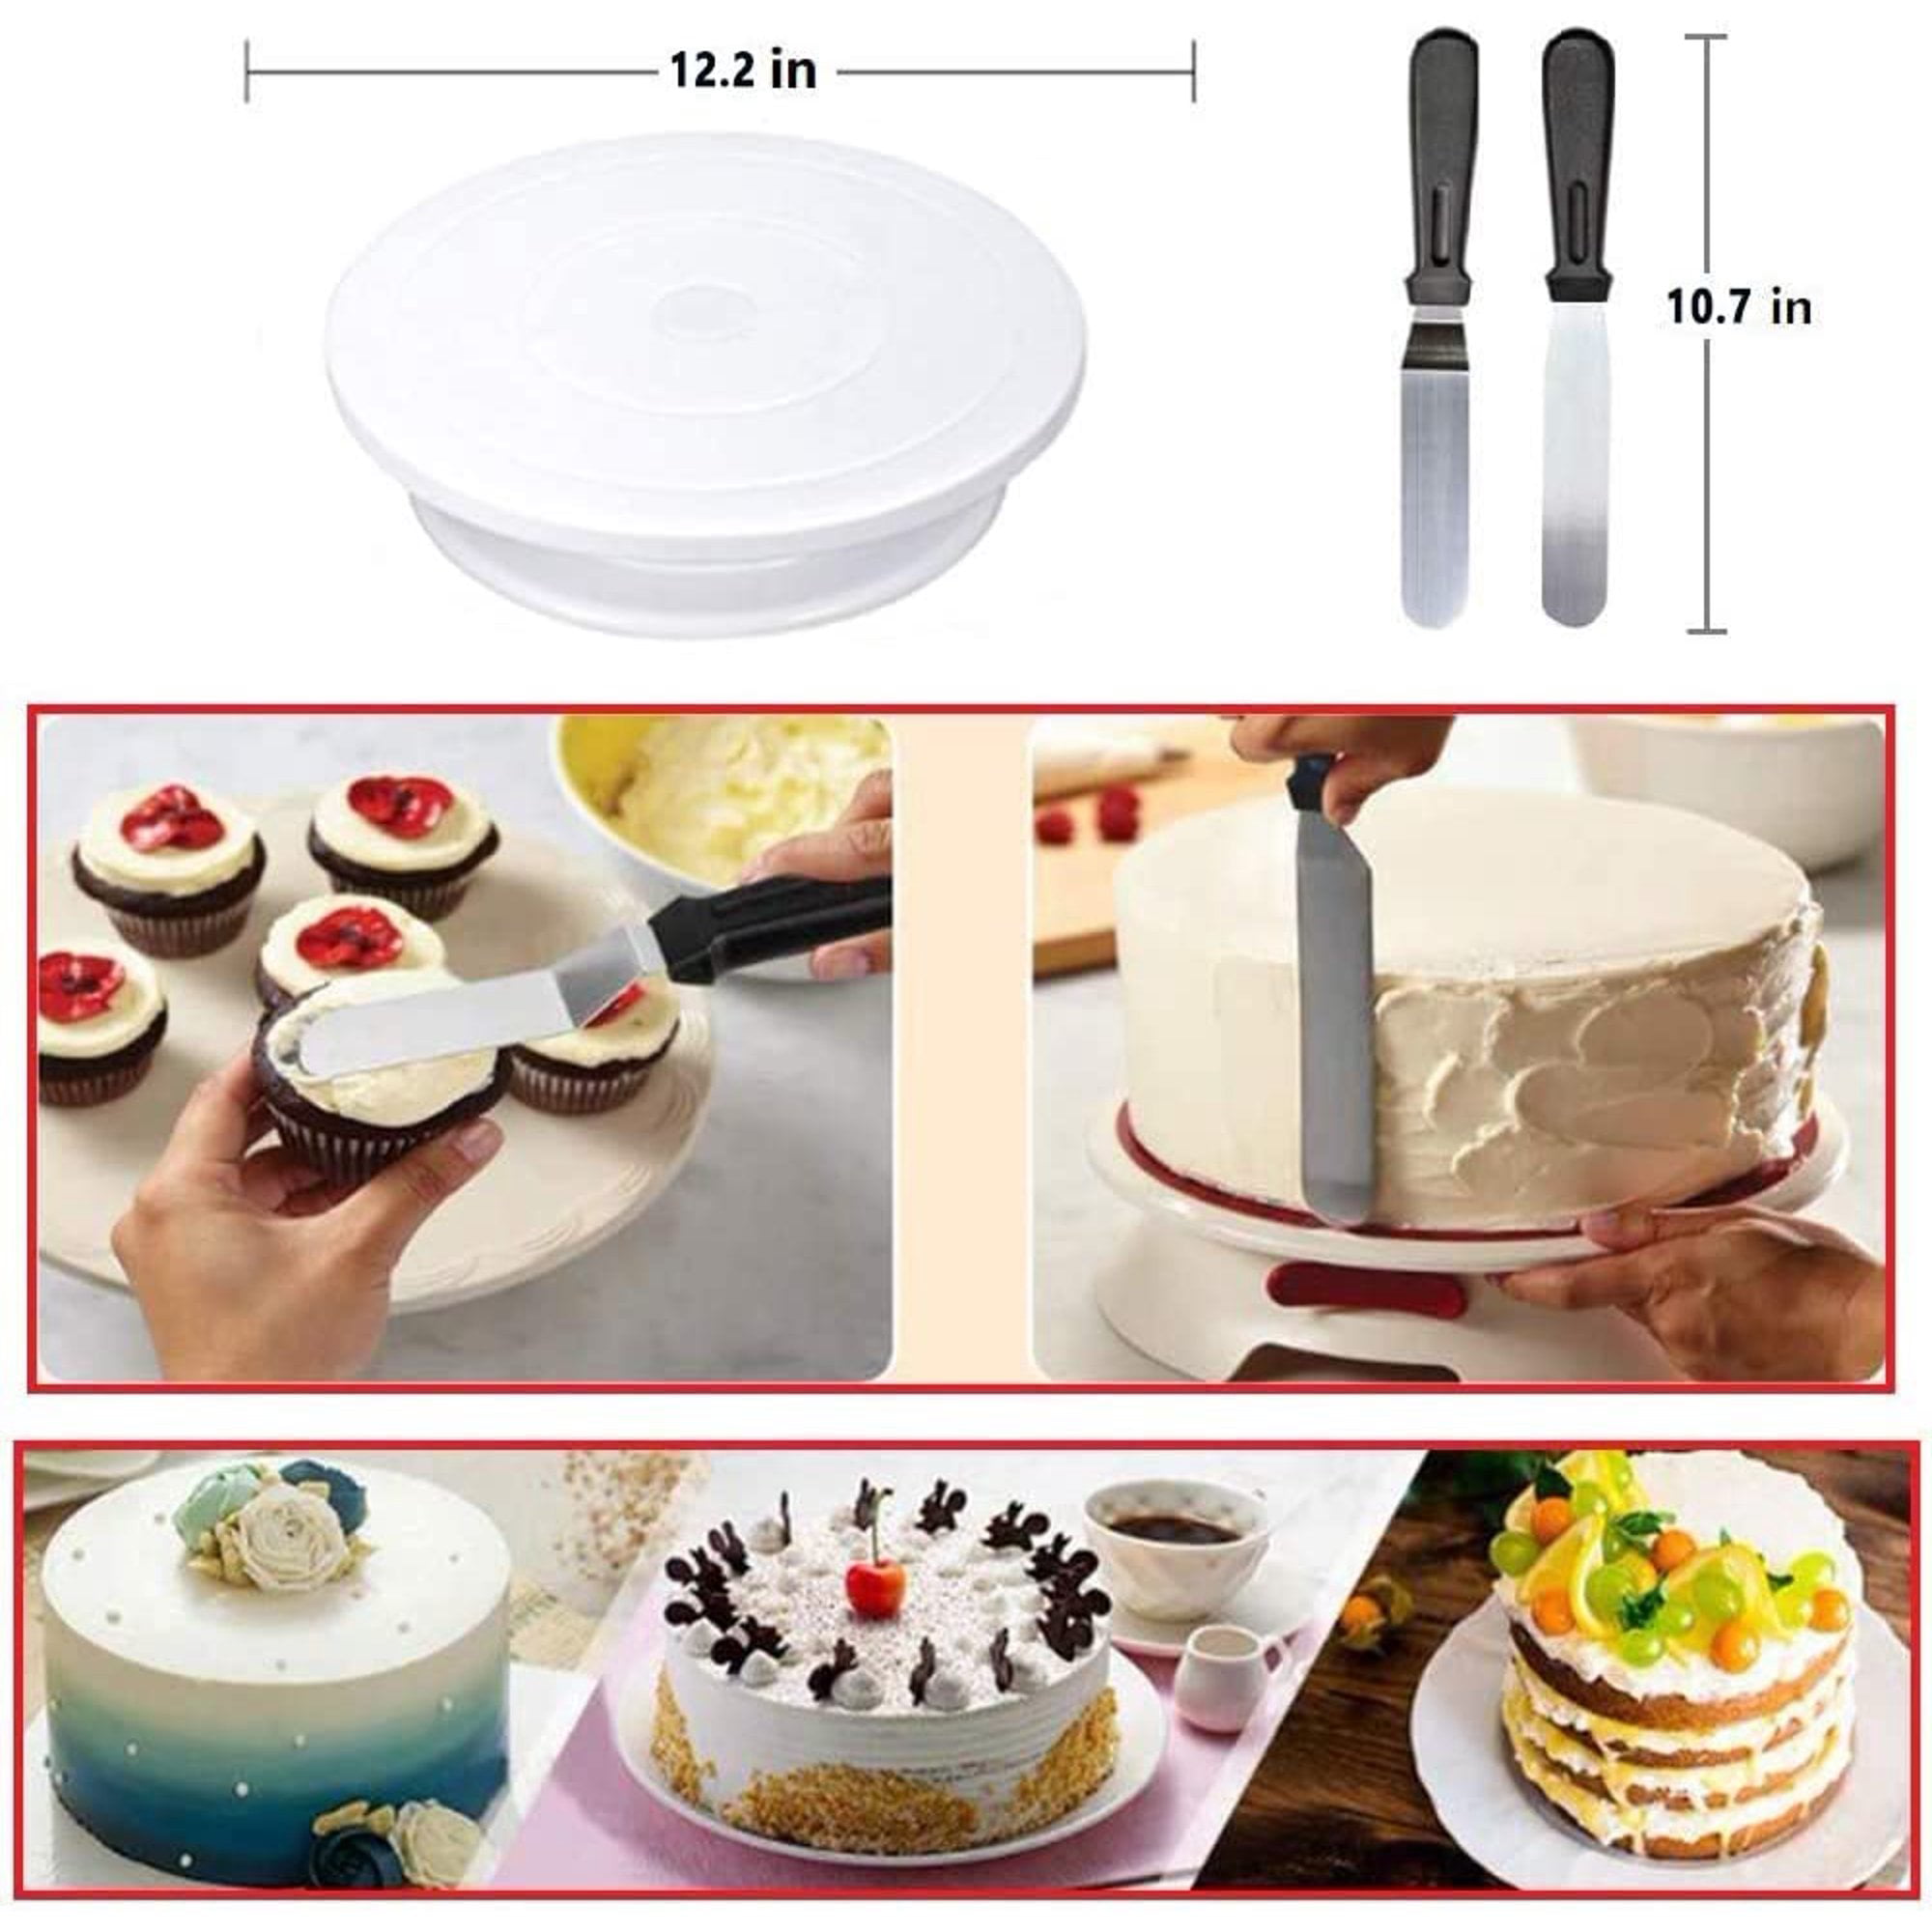 Copedvic 150pcs Cake Decorating Supplies Set, Cupcake Decorating Kit Baking Equipment Rotating Turntable Stand, Piping Nozzles and Bags, Cake Scrapers